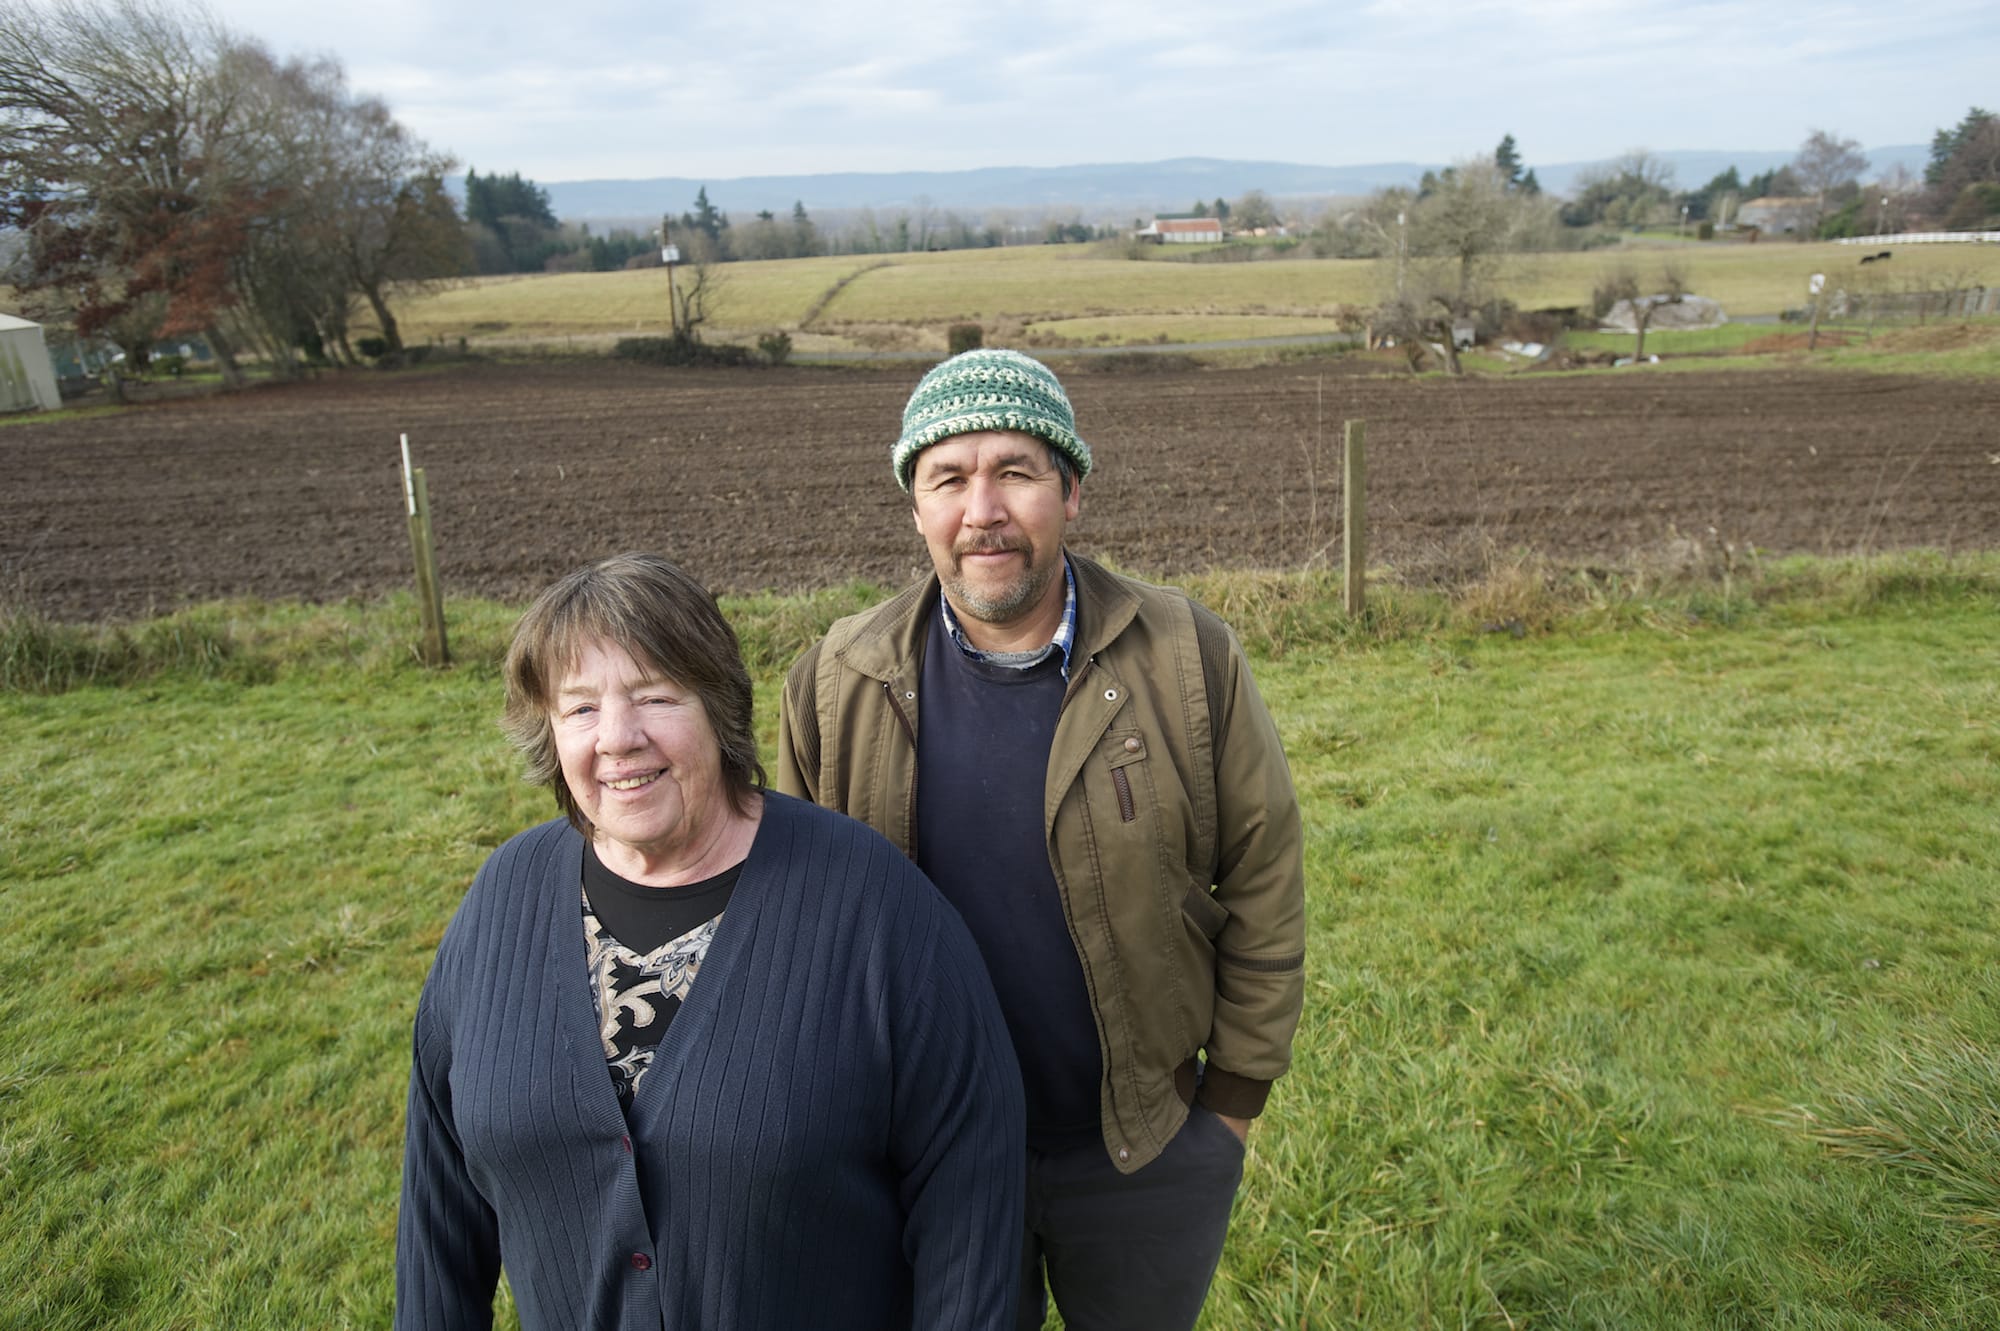 Northwest Organic Farms operators Joyce Haines and Greg Valdivia see education as part of the job of running the Ridgefield-area farm. &quot;I wish we could get more kids from schools to come out,&quot; Haines said. &quot;A lot of kids don't have any idea where their food comes from.